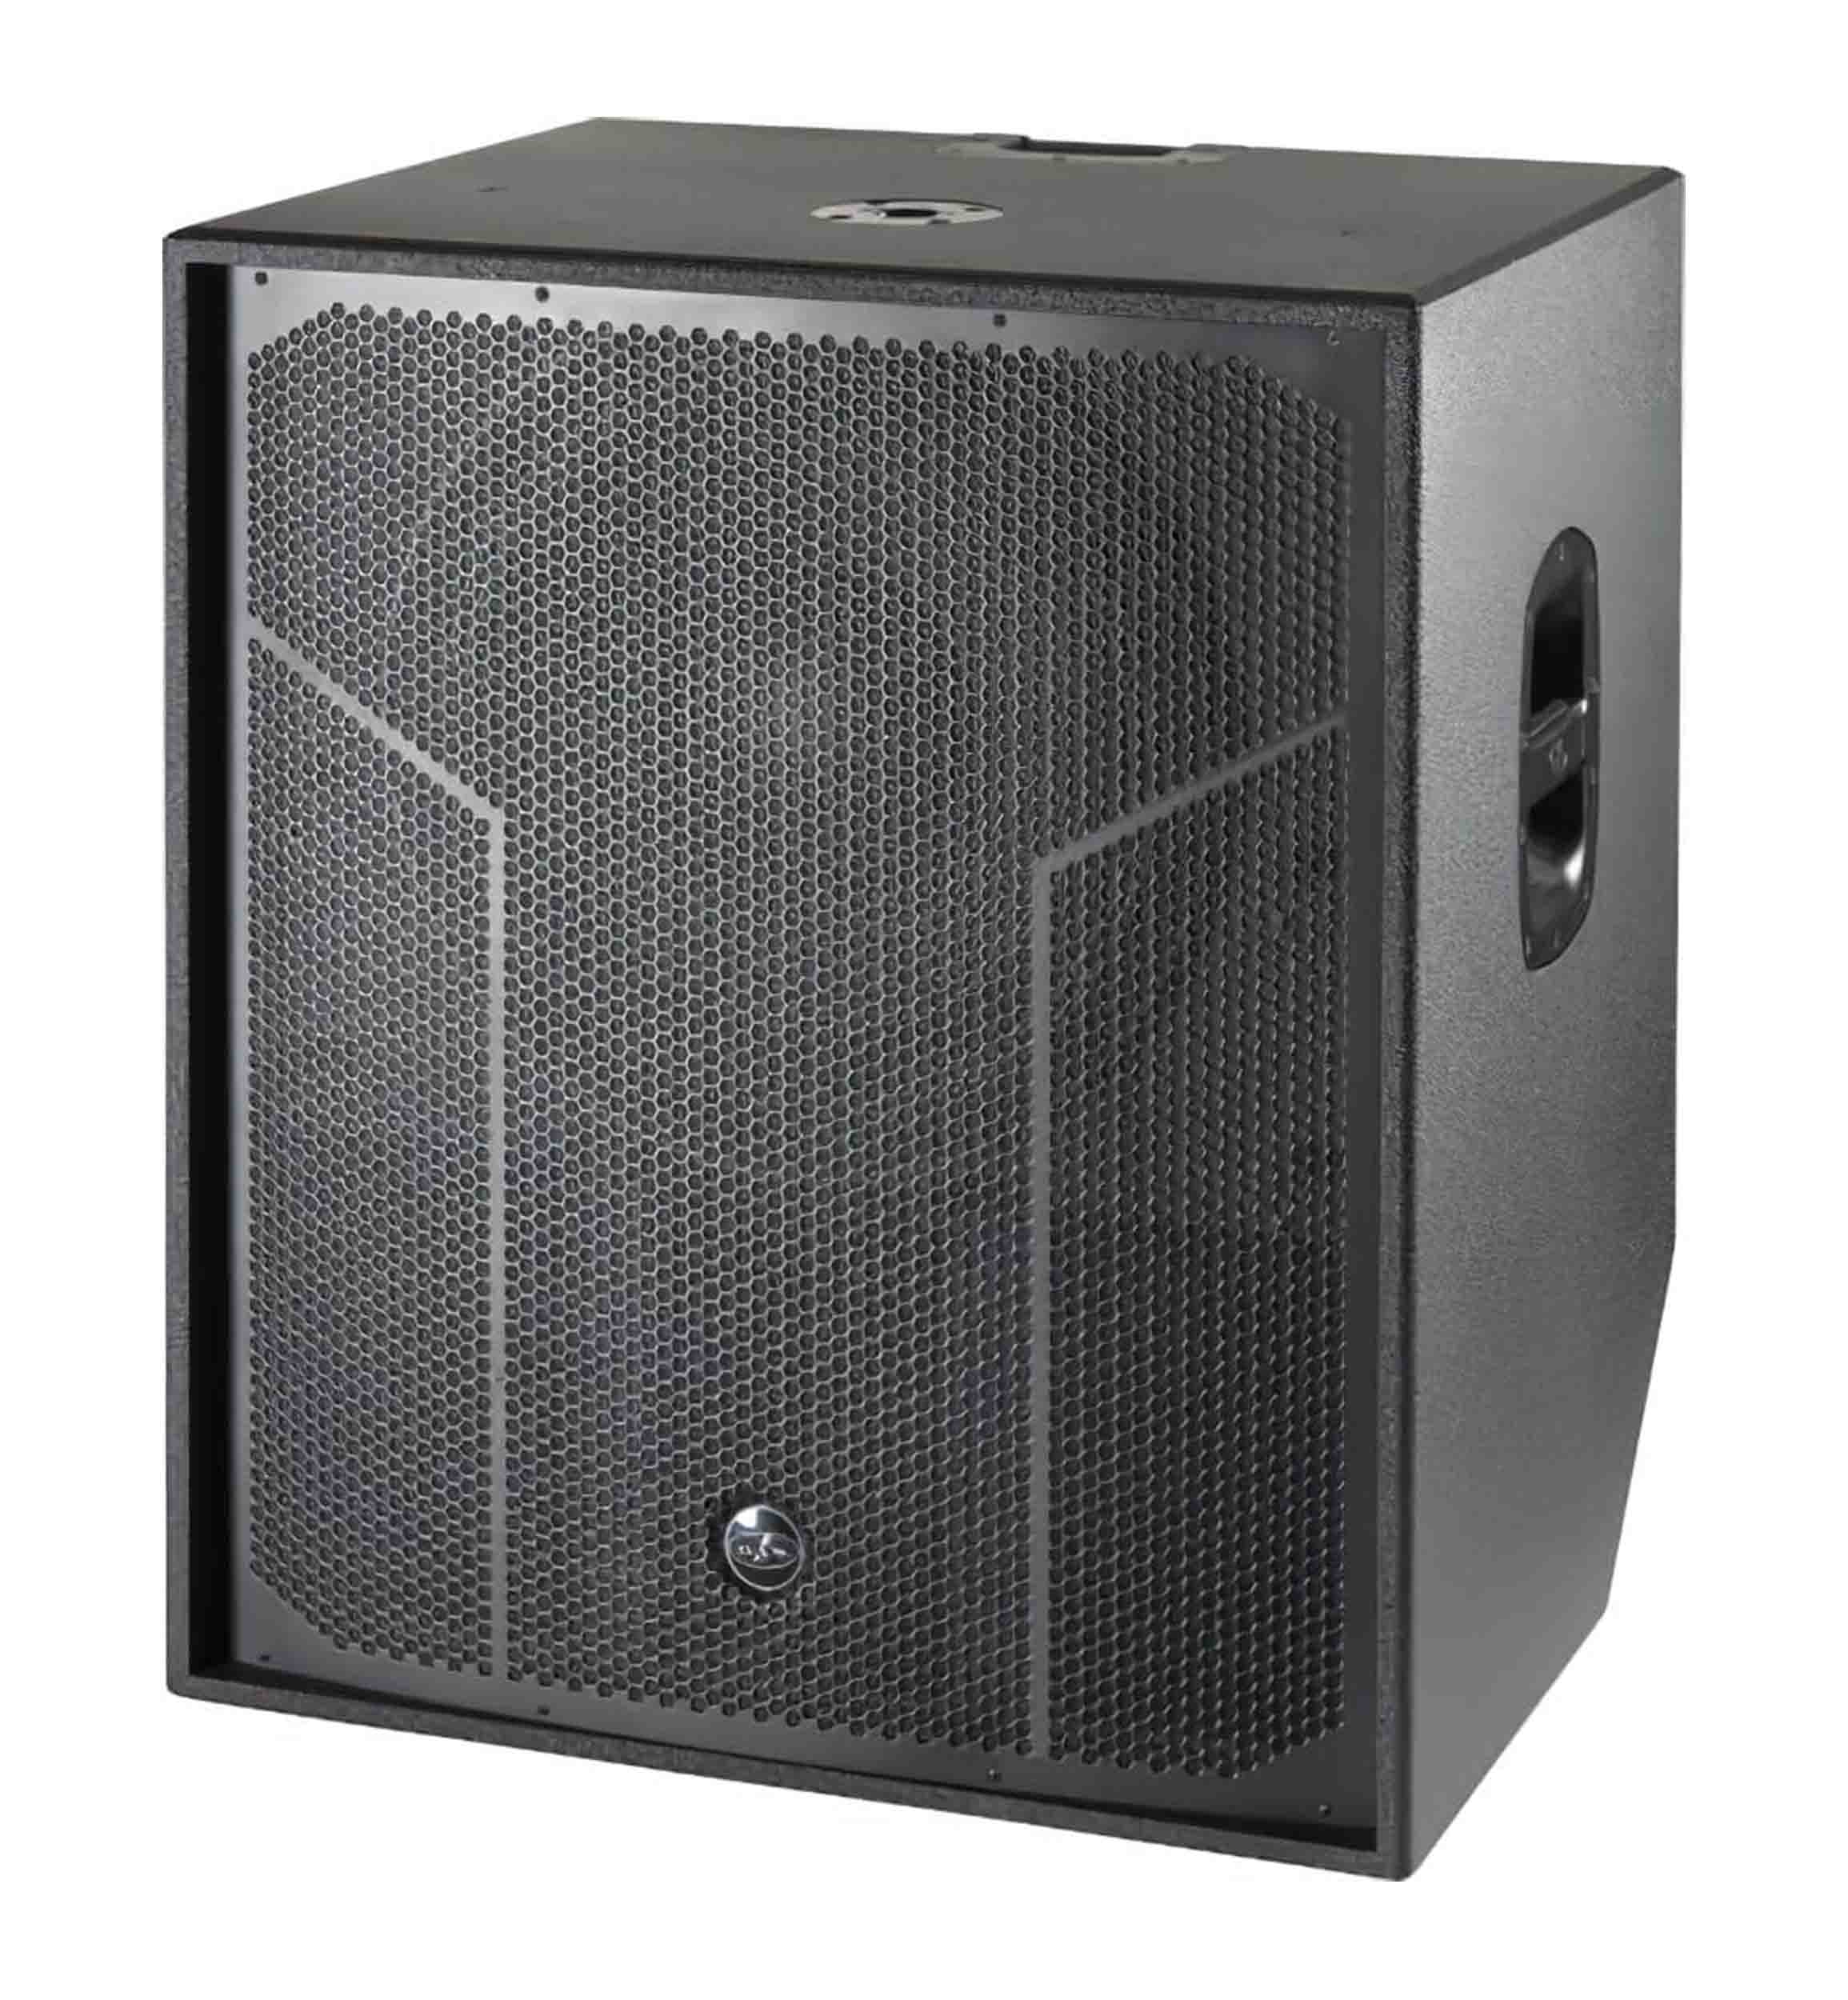 DAS Audio ACTION-S118A-115, 18-Inch 3200W Powered Horn-Loaded Subwoofer System with DSP - Black by DAS Audio